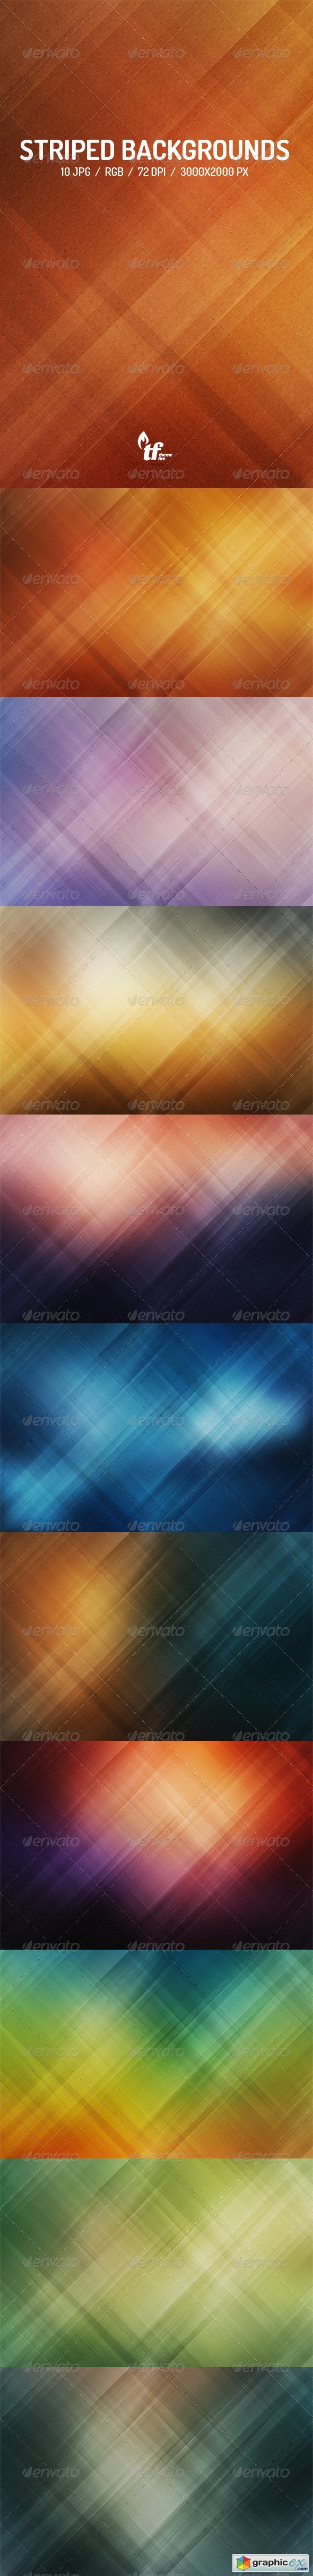 Abstract Striped Backgrounds